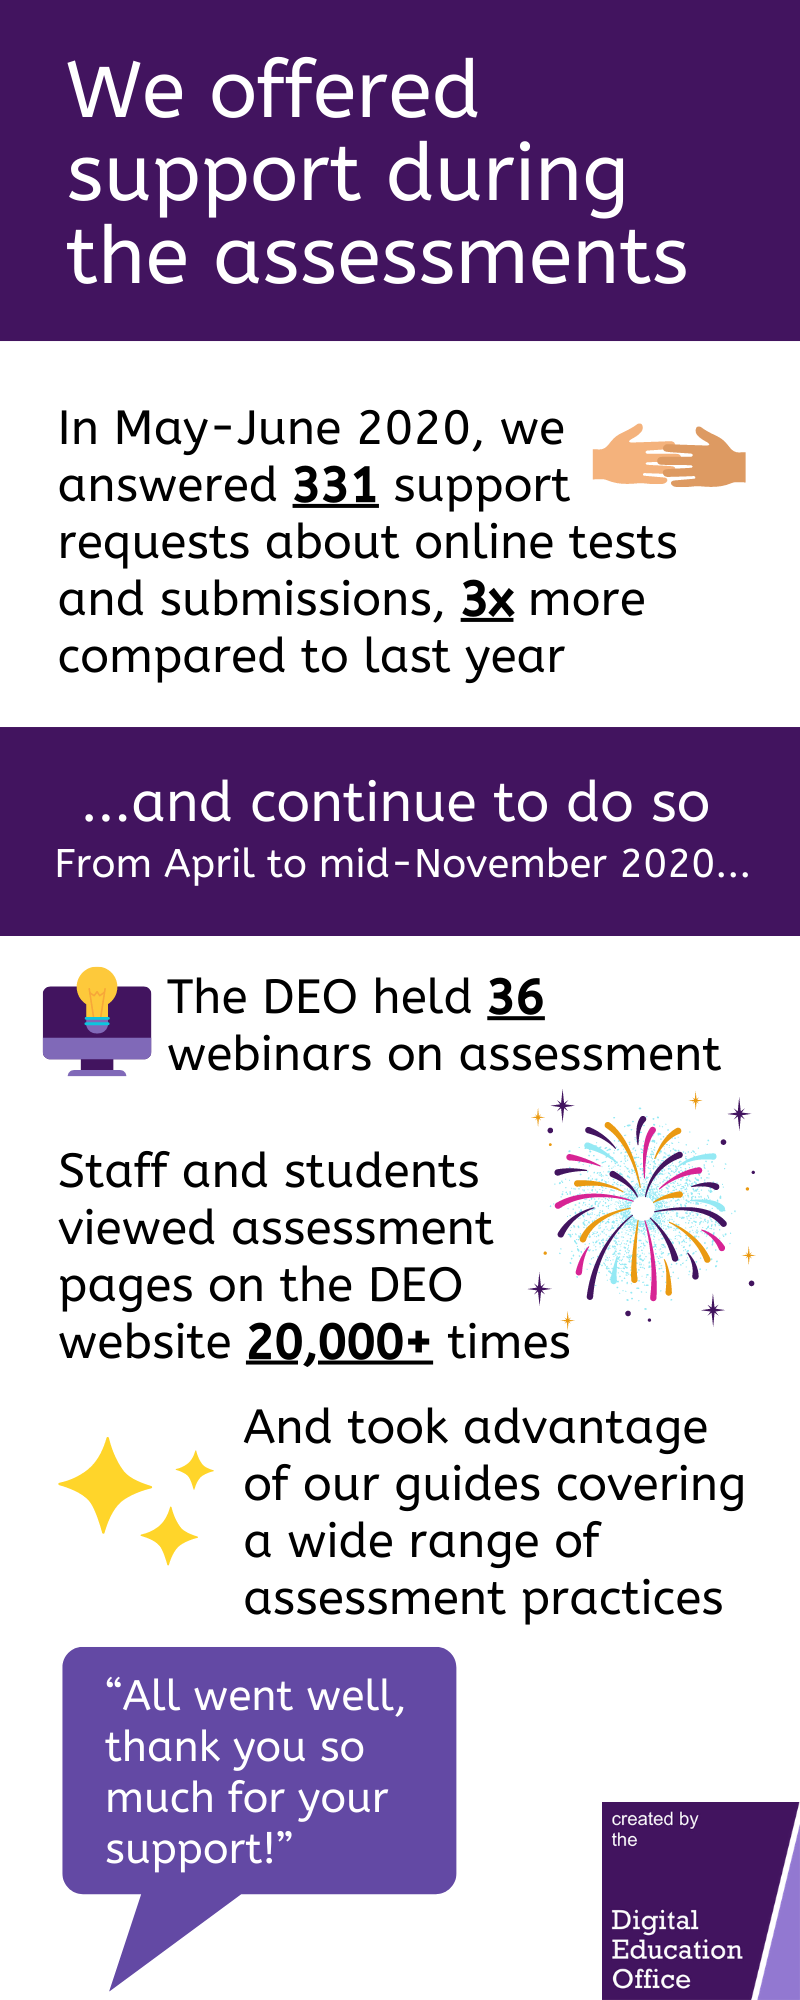 We offer support. In May-June 2020, we answered 331 support requests about assessment, 3x more compared to last year. From April to November 2020, the DEO held 36 webinars on assessment.Staff and students viewed related pages on the DEO website 20000+ times and took advantage of our 100+ guides. All went well, thank you so much for your support,Your guide is great, shame I didn't find it earlier